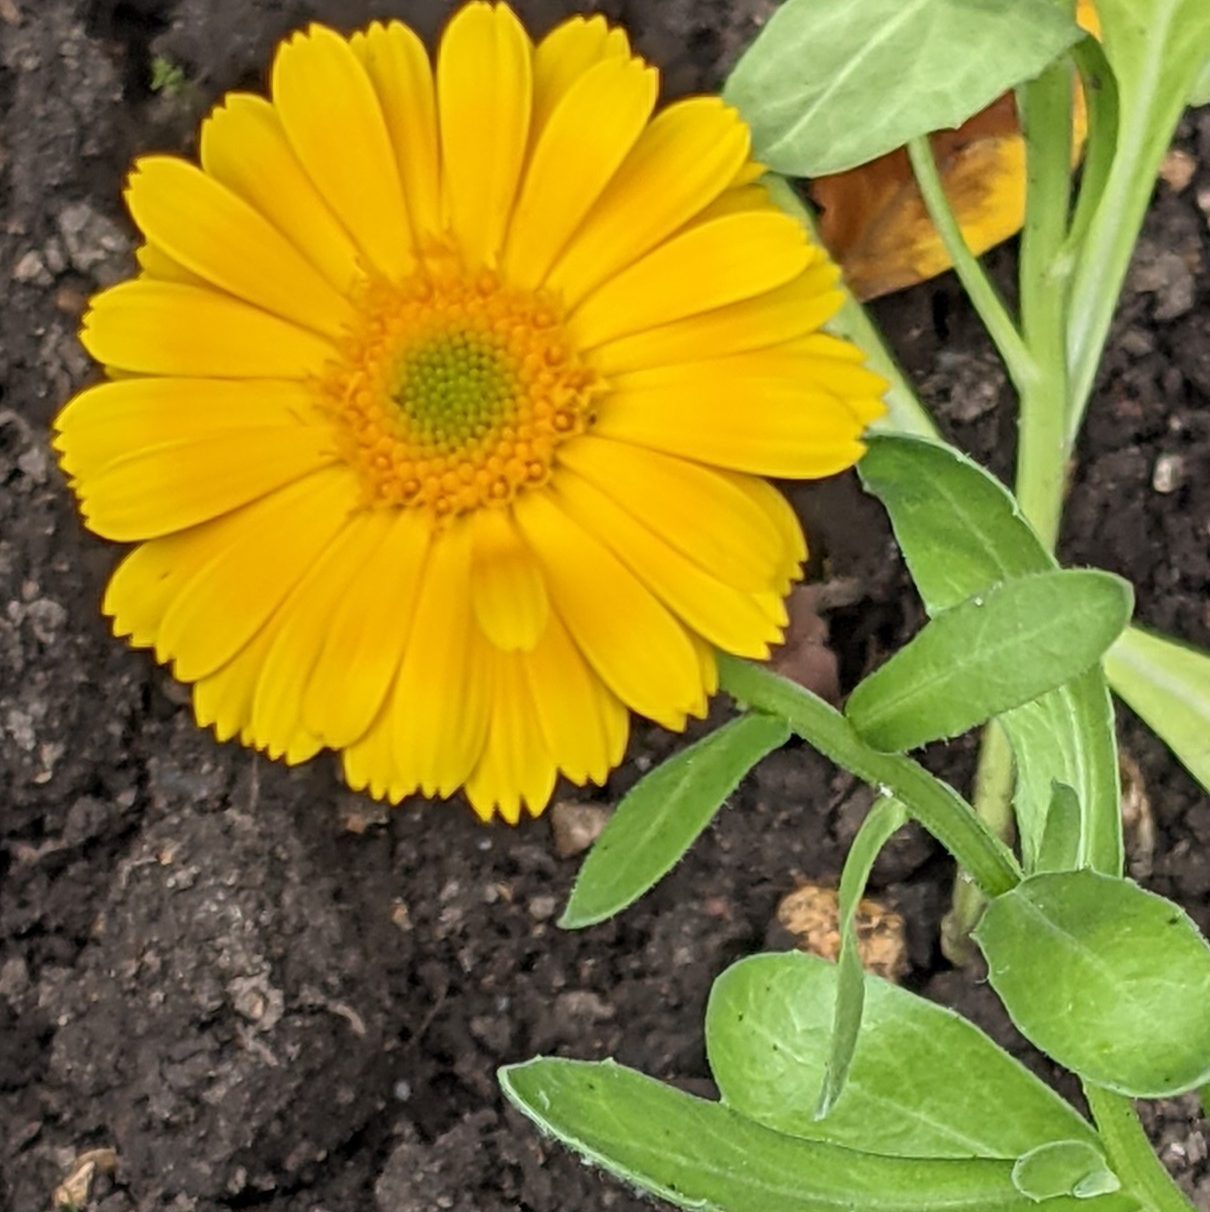 Calendula or marigold a plant used in homeopathy to promote healing.  It can also be used topically in herbal form